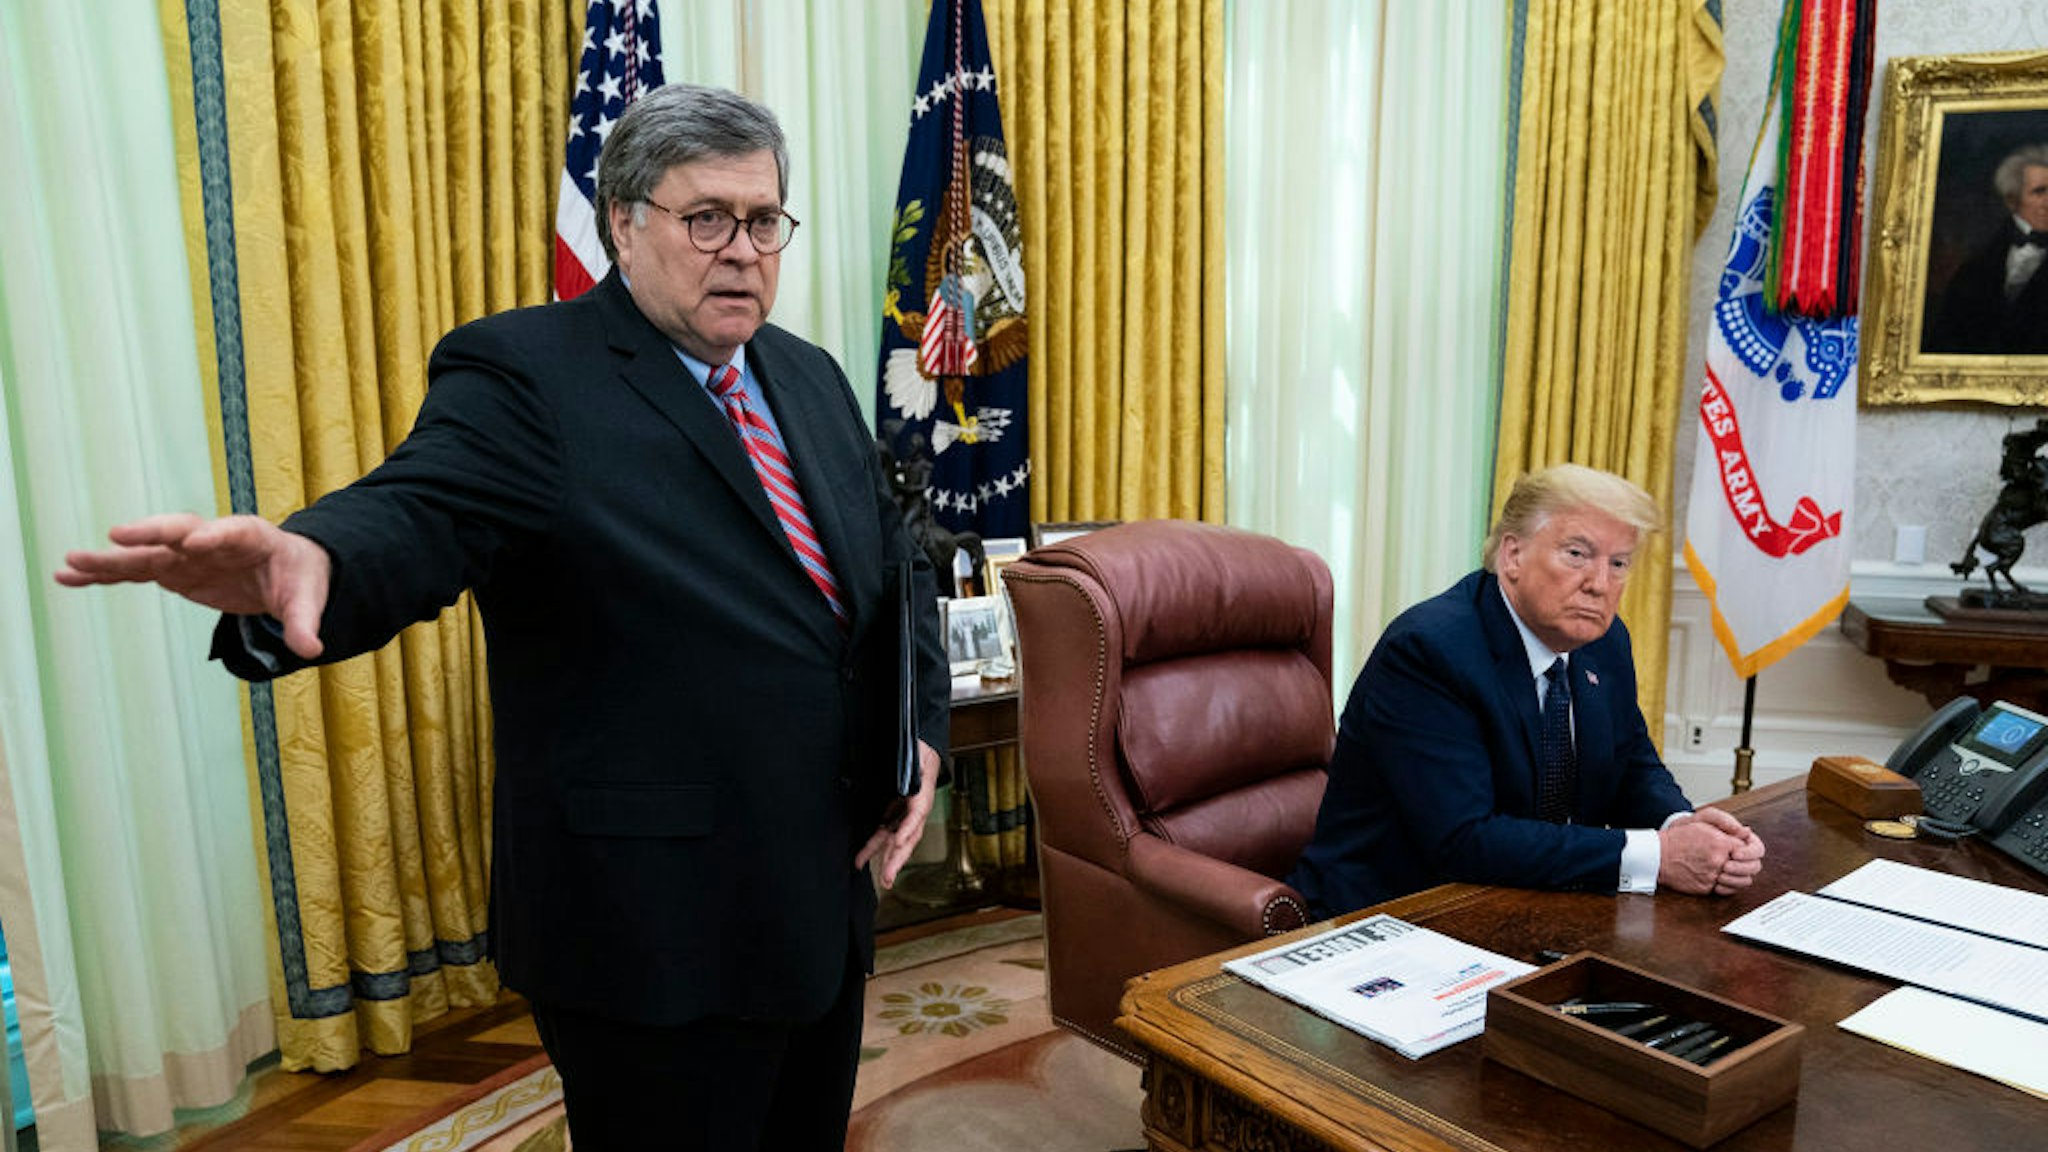 President Donald Trump with Attorney General William Barr, make remarks before signsing an executive order in the Oval Office that will punish Facebook, Google and Twitter for the way they police content online, Thursday, May 28, 2020. ( Photo by Doug Mills/The New York Times)